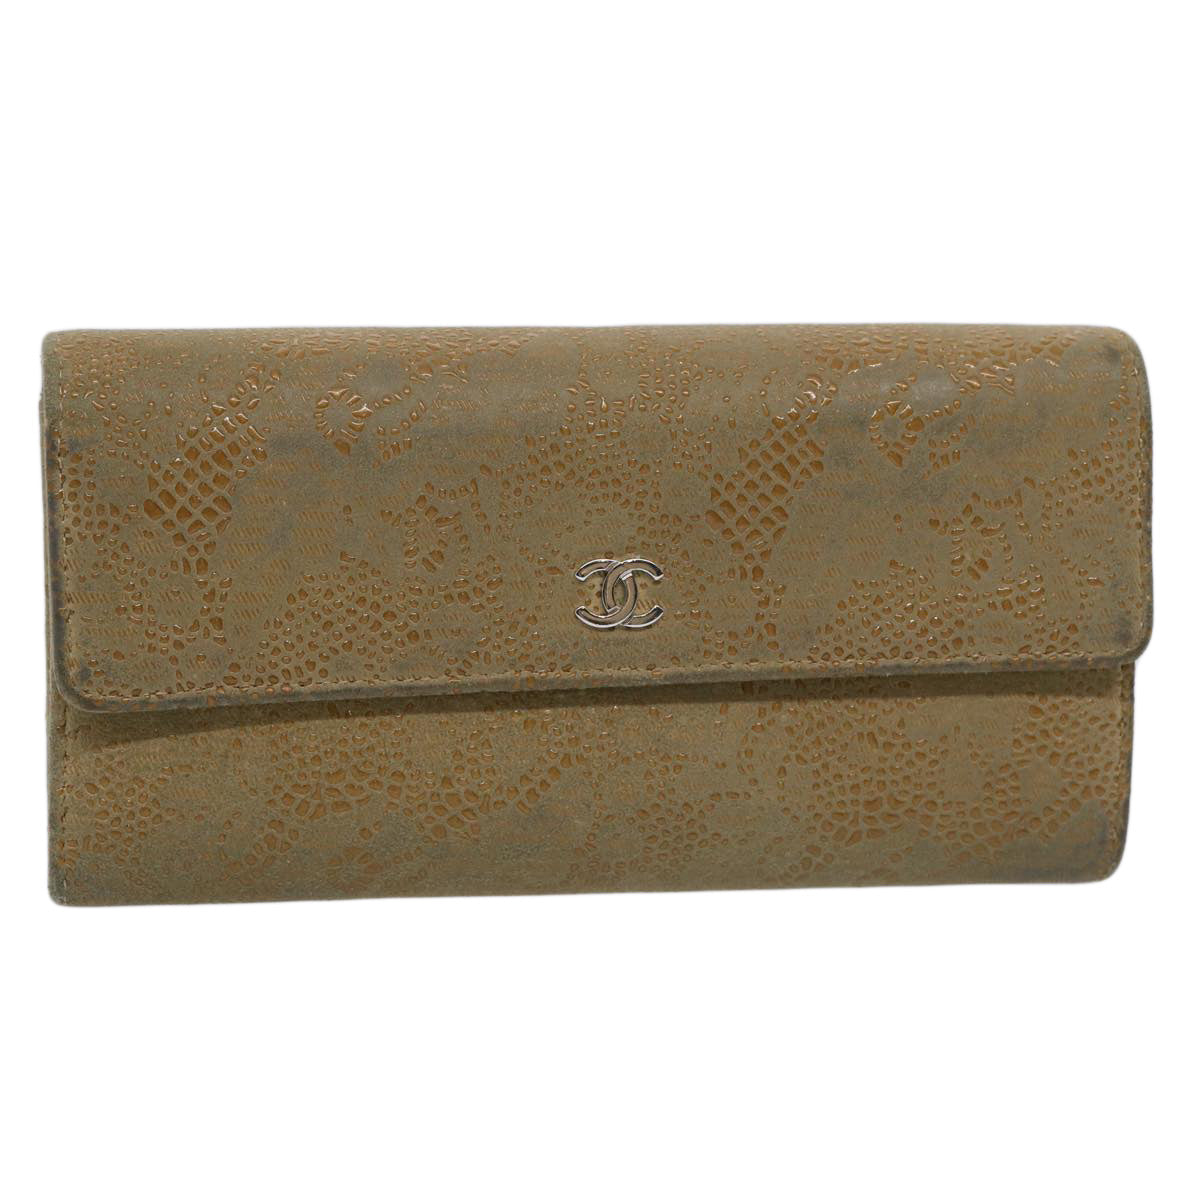 CHANEL Long Wallet Suede Beige CC Auth bs10744